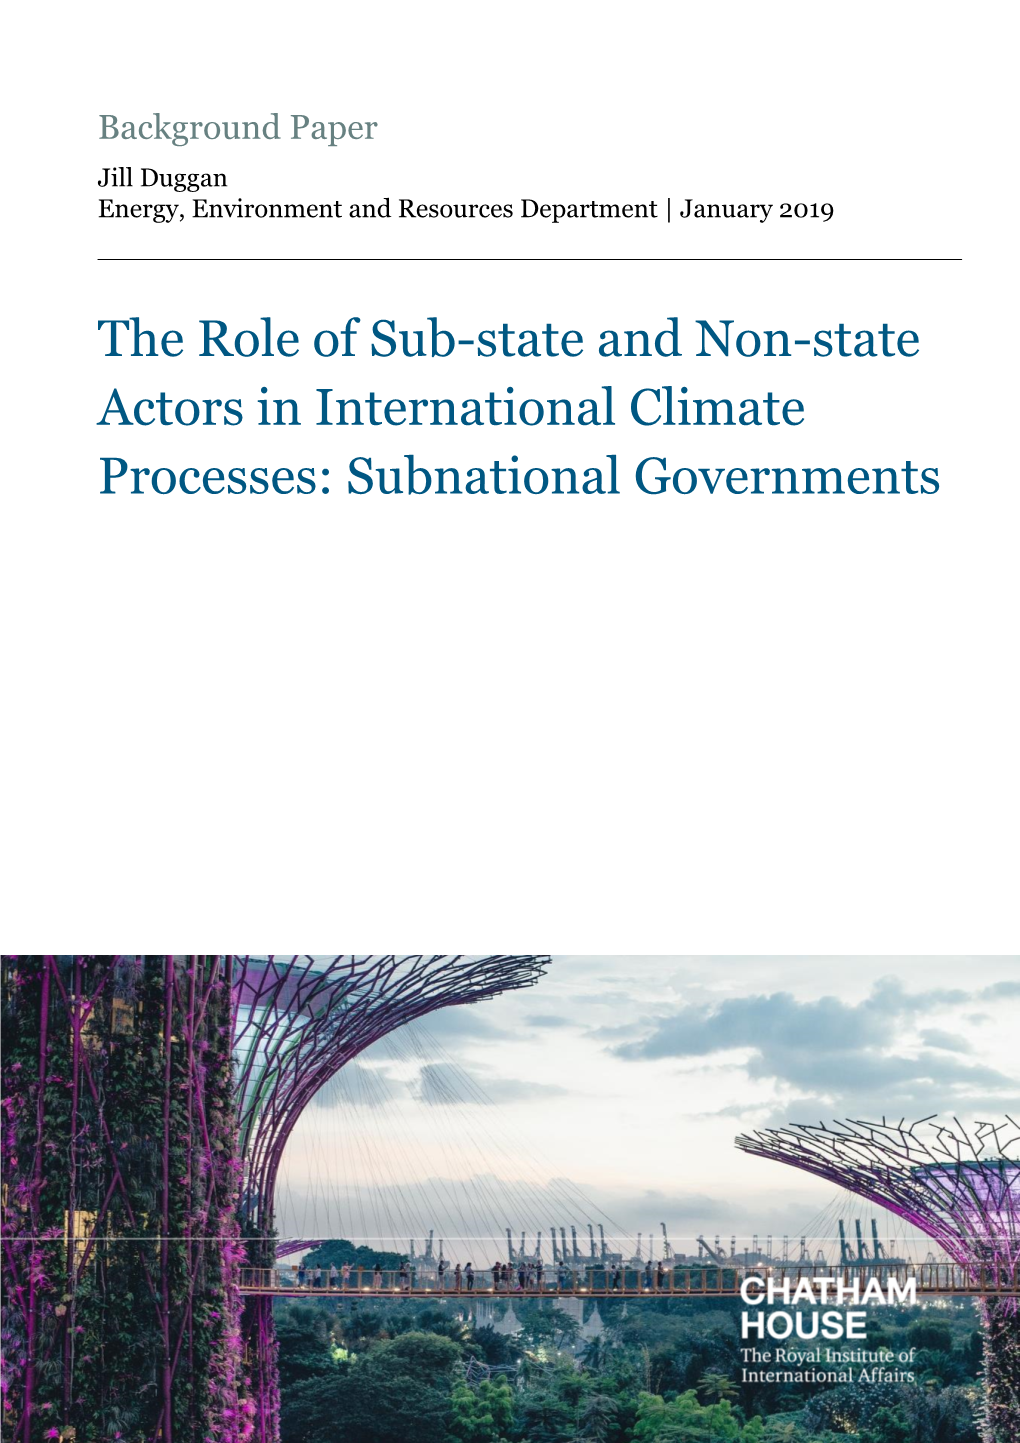 The Role of Sub-State and Non-State Actors in International Climate Processes: Subnational Governments